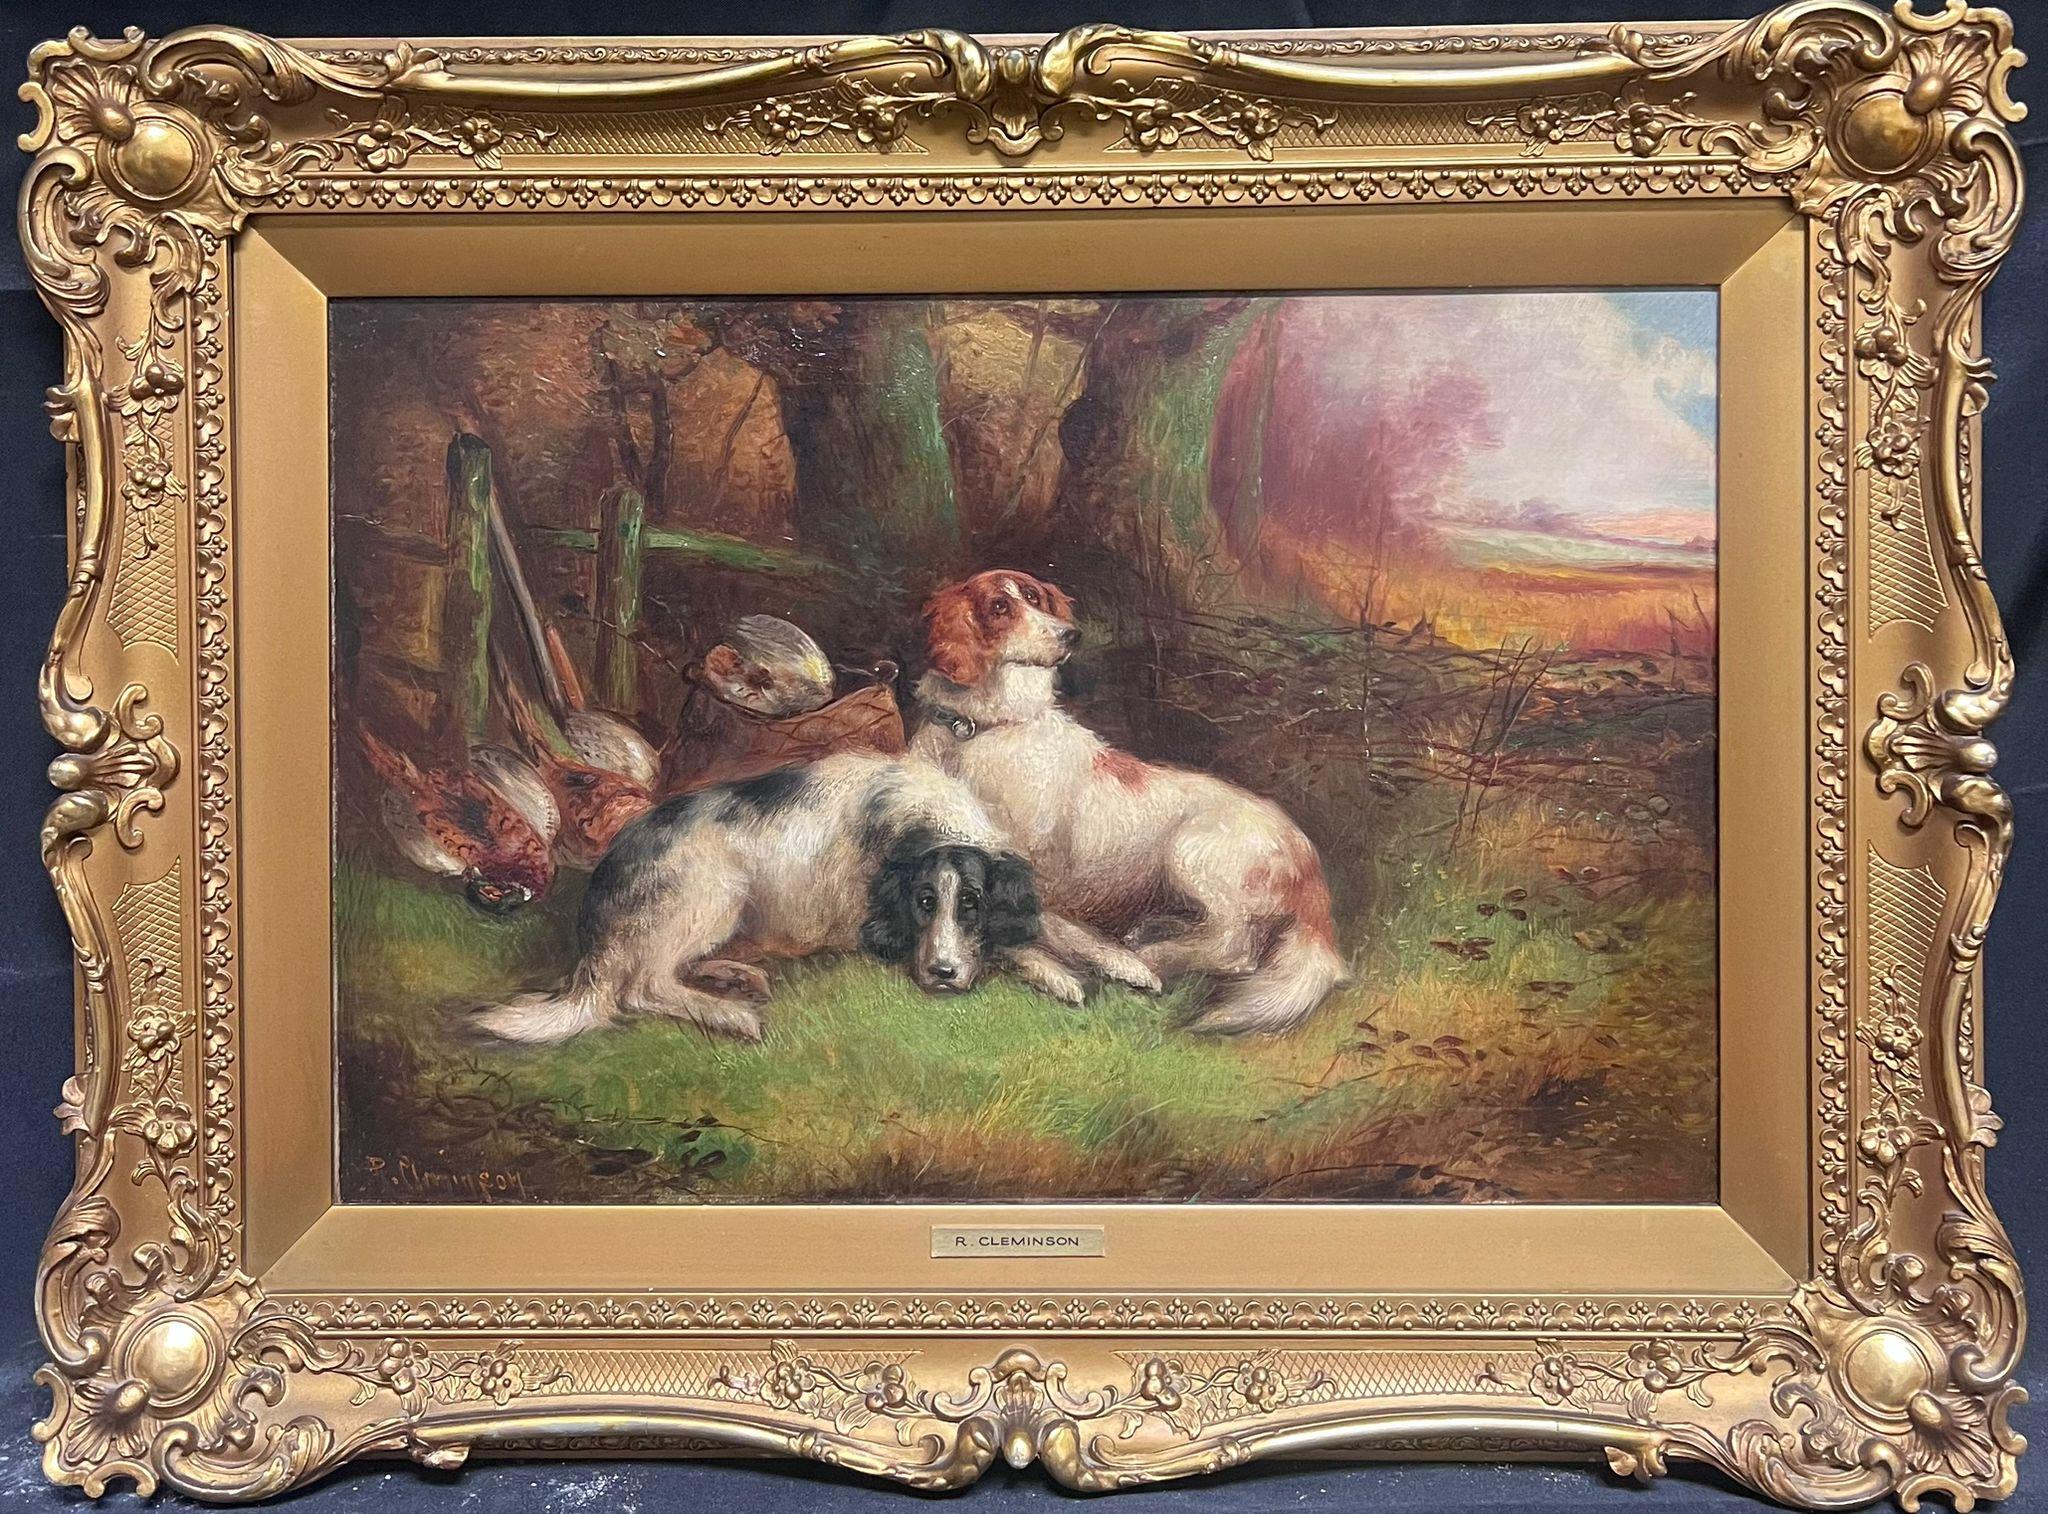 Landscape Painting Robert Cleminson - Setter Dogs/ Spaniels in Sporting Landscape Original Victorian English Dog Oil